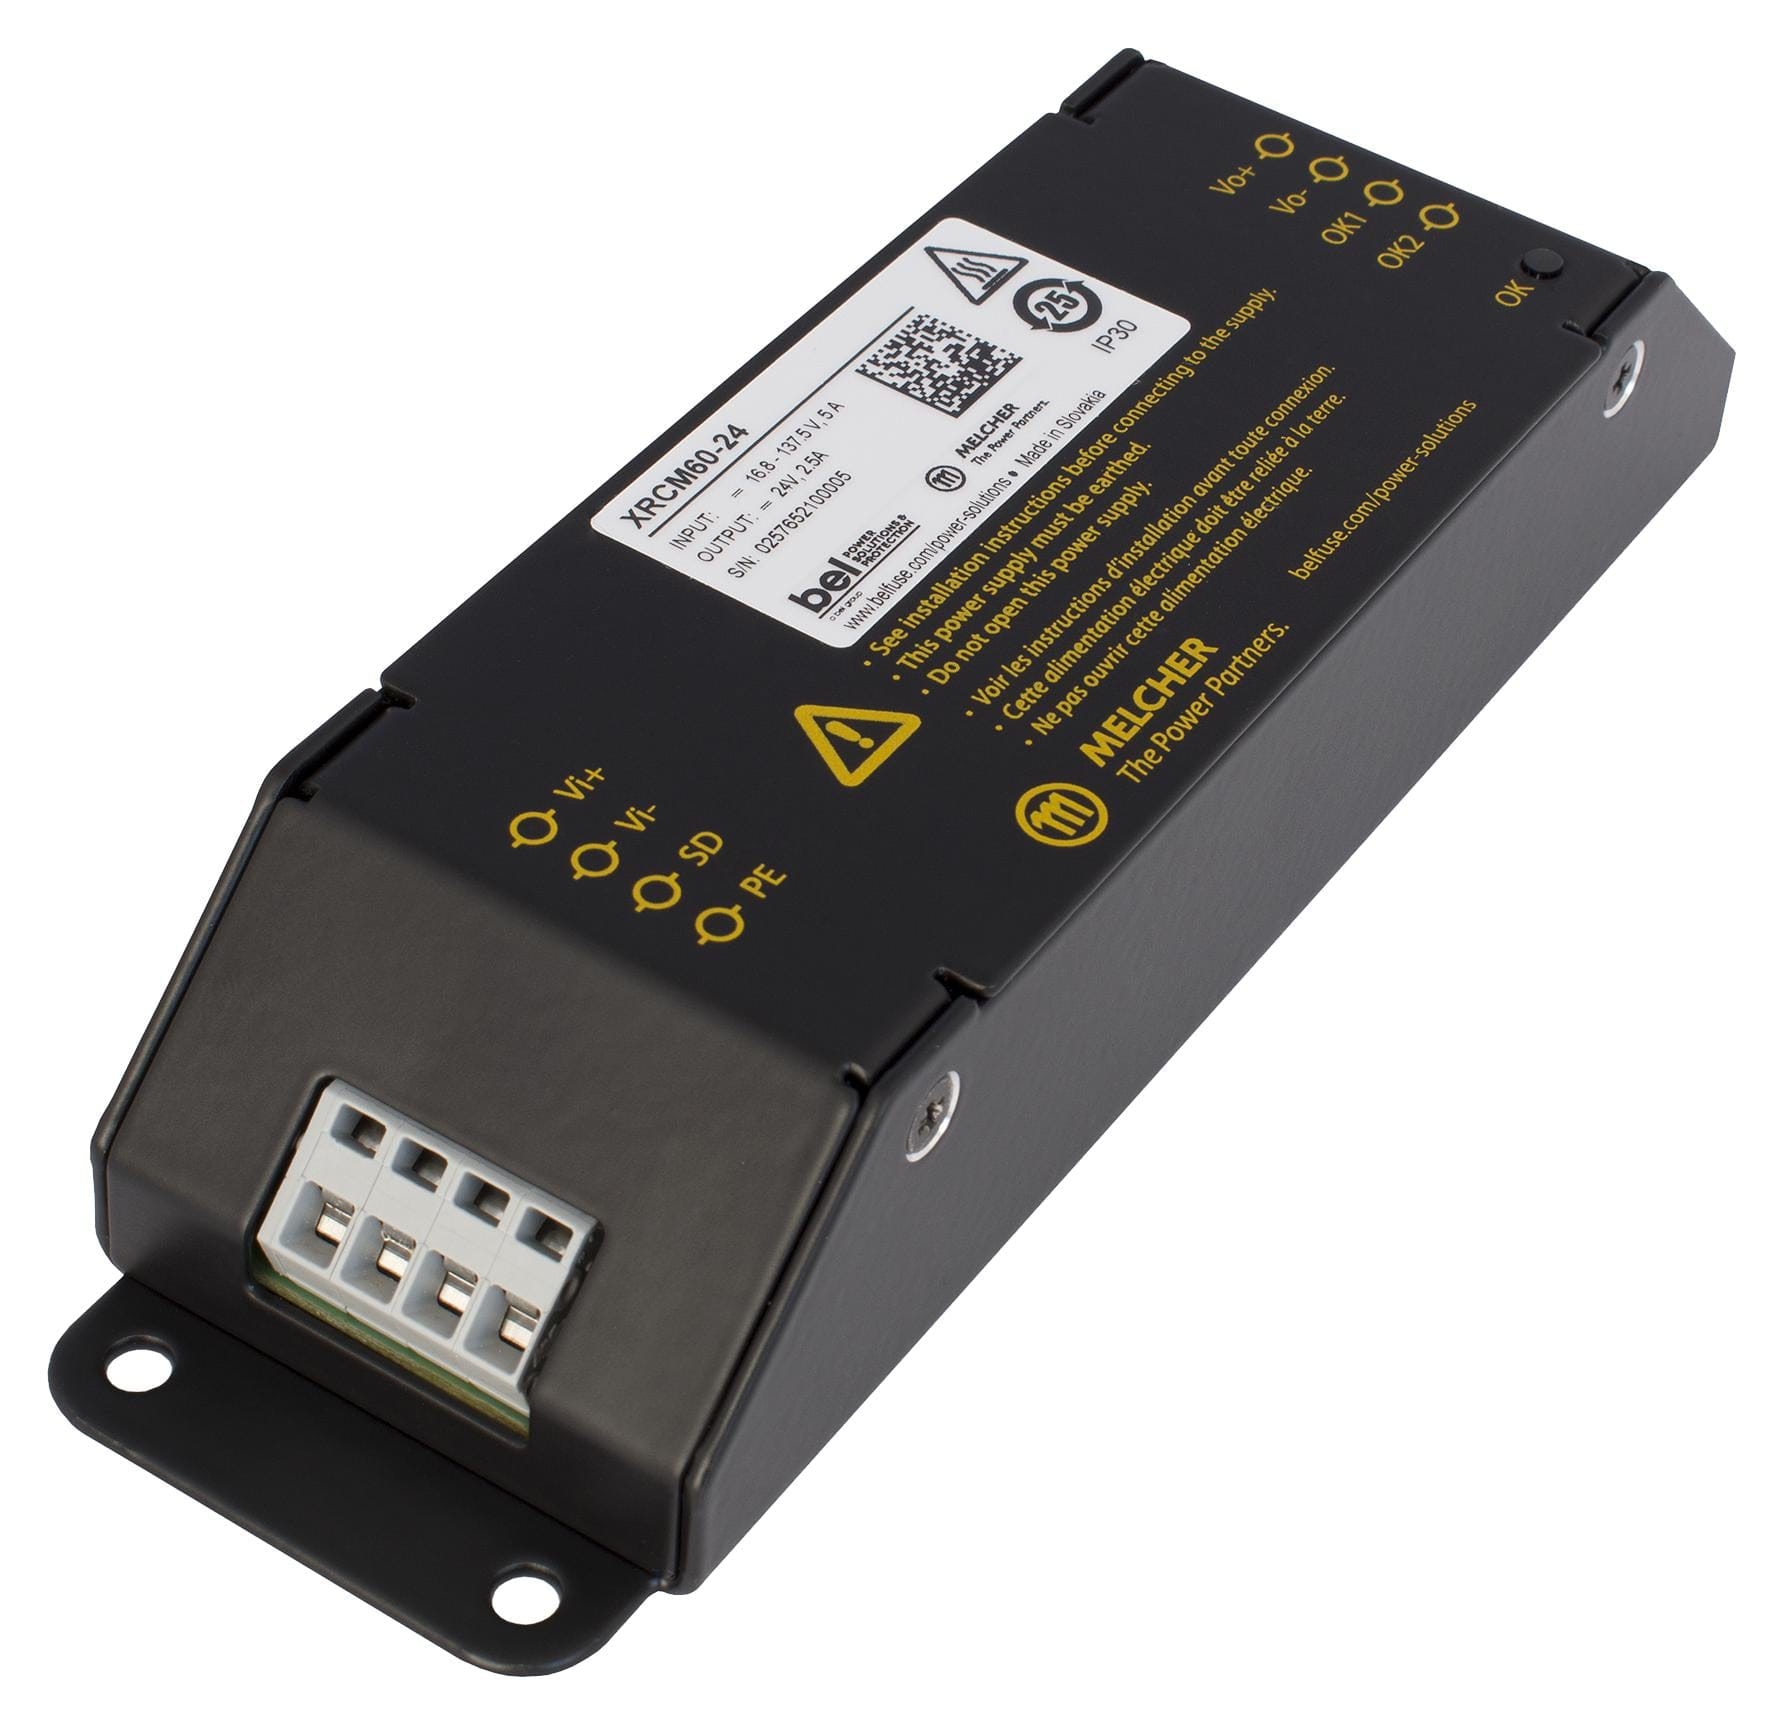 BEL POWER SOLUTIONS Modules / DIN Rail / Front End XRCM60-24 DC-DC CONVERTER, 24V, 2.5A BEL POWER SOLUTIONS 3499677 XRCM60-24